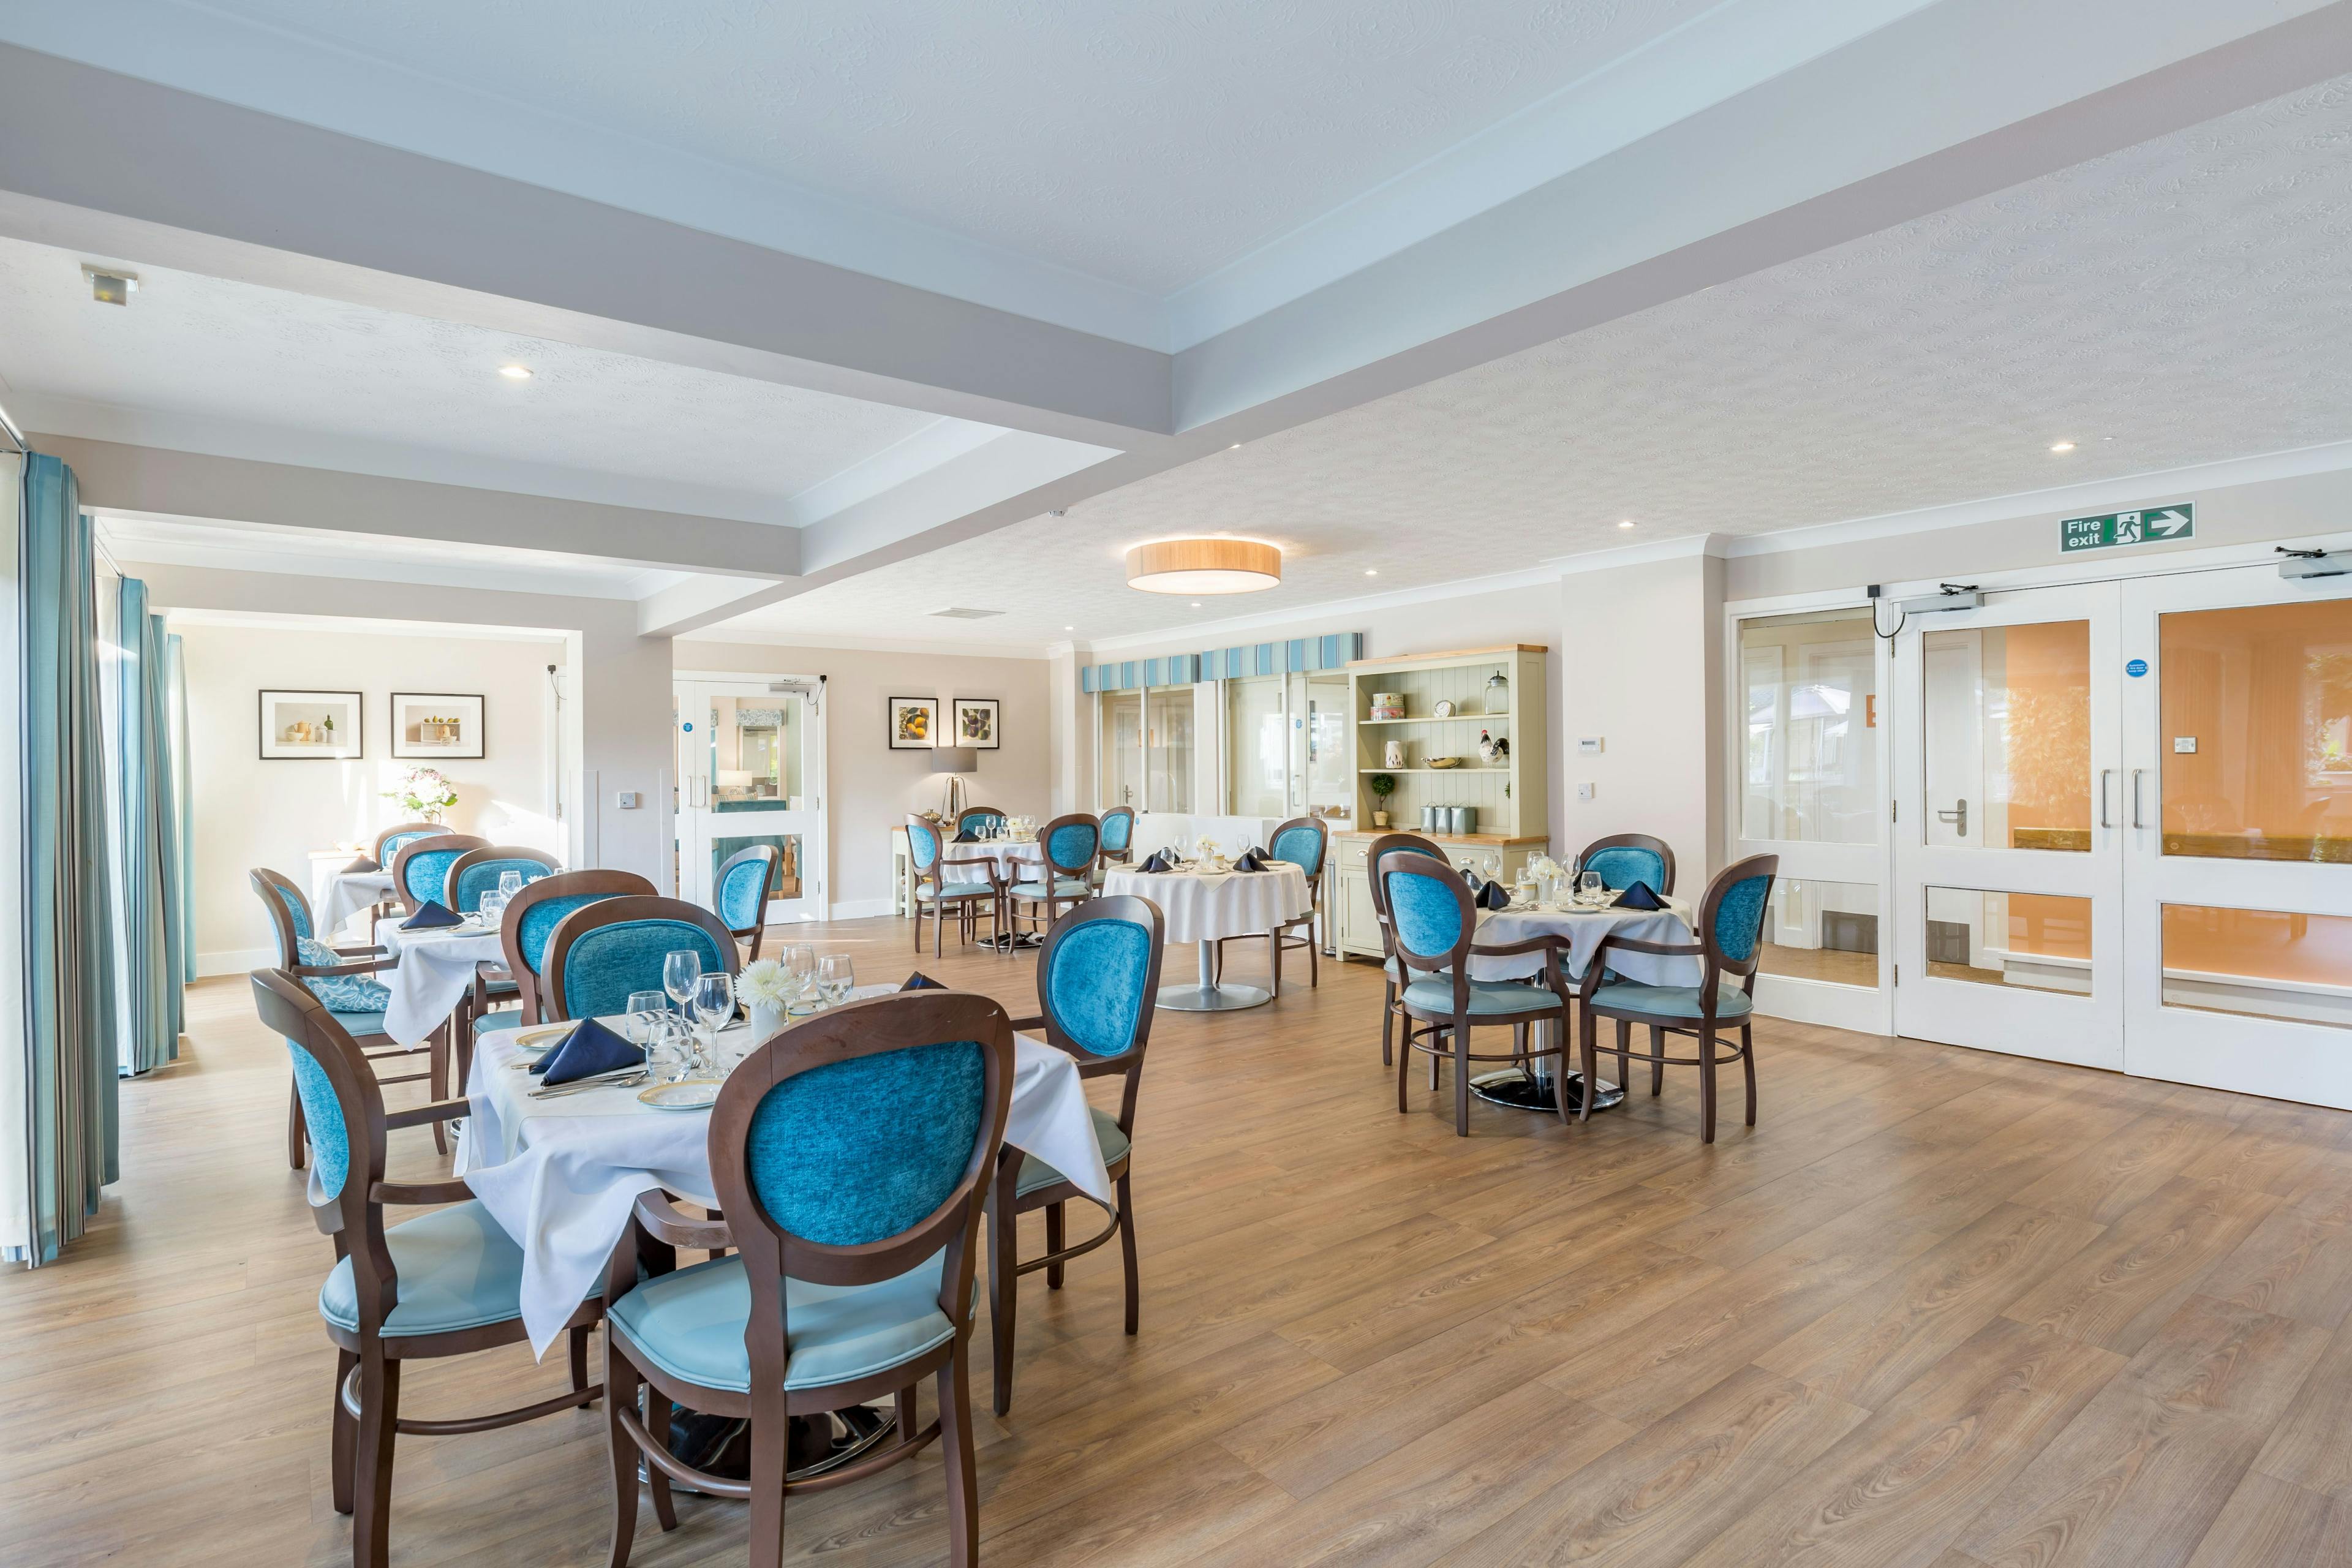 Dining Room at Leonard Lodge Care Home in Brentwood, Essex